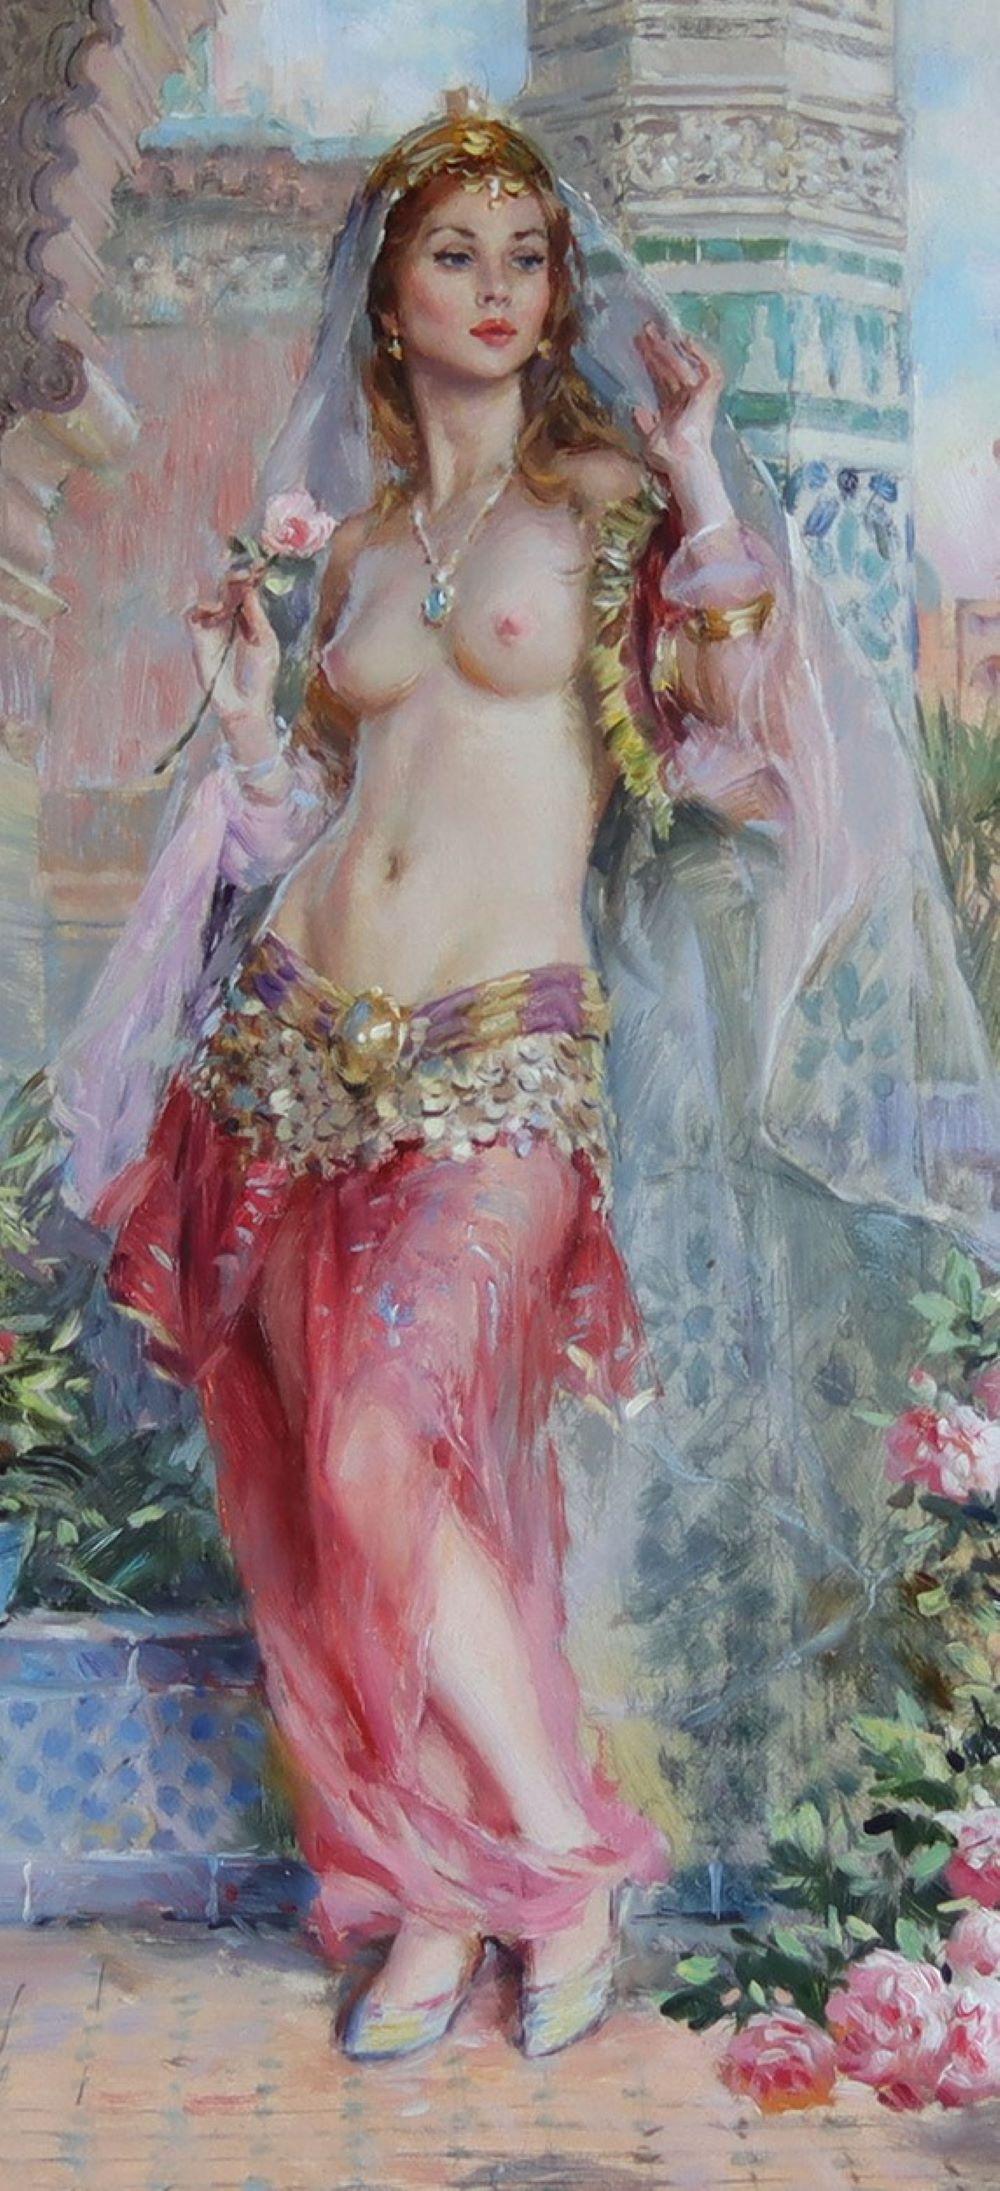 Semi-Nude Lady in the Courtyard of the Harem - Impressionist Painting by Konstantin Razumov 